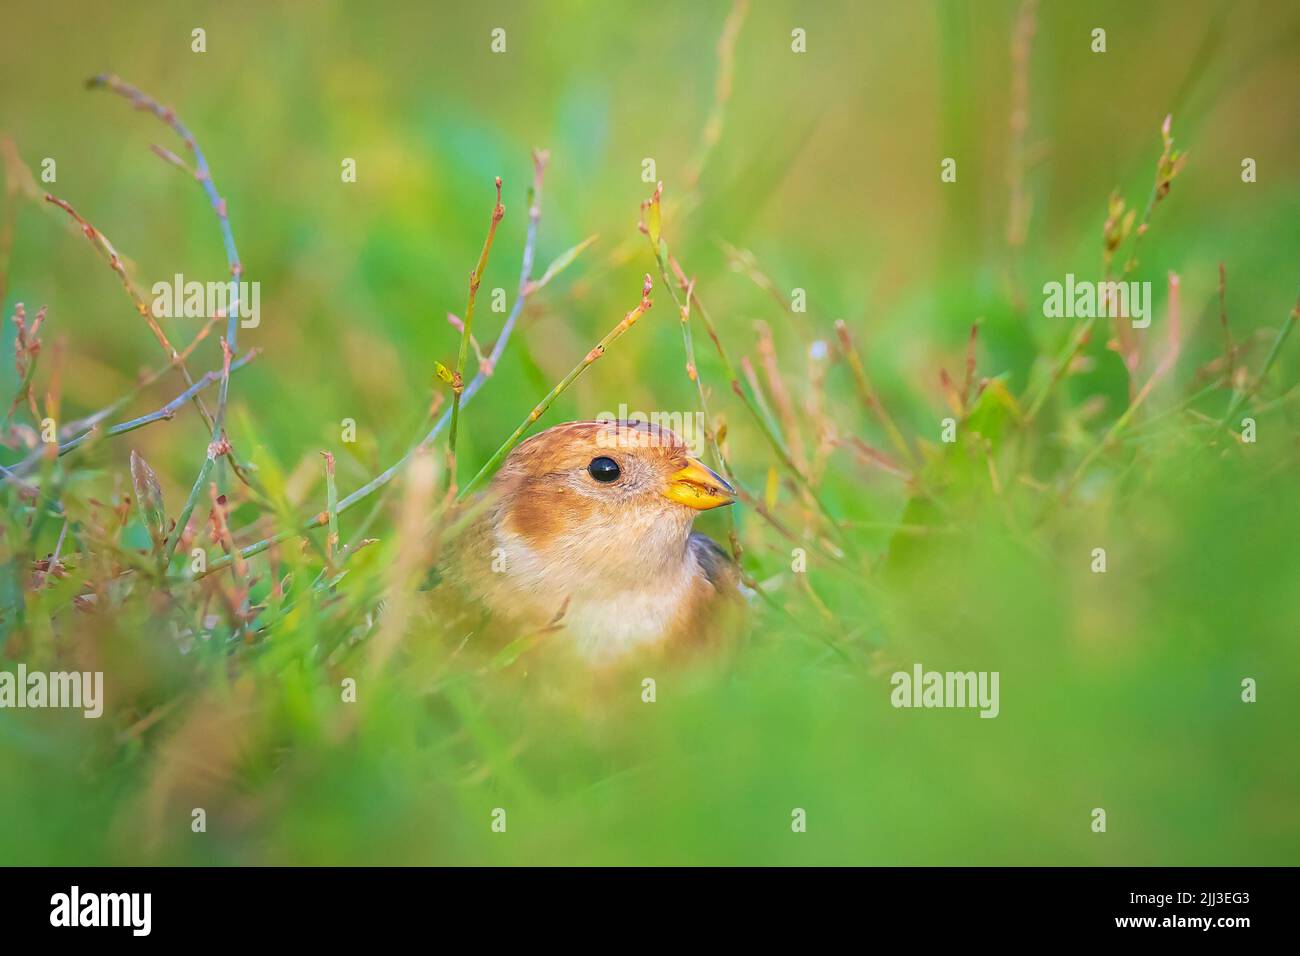 Closeup of a snow bunting, Plectrophenax nivalis, bird foraging in grass Stock Photo